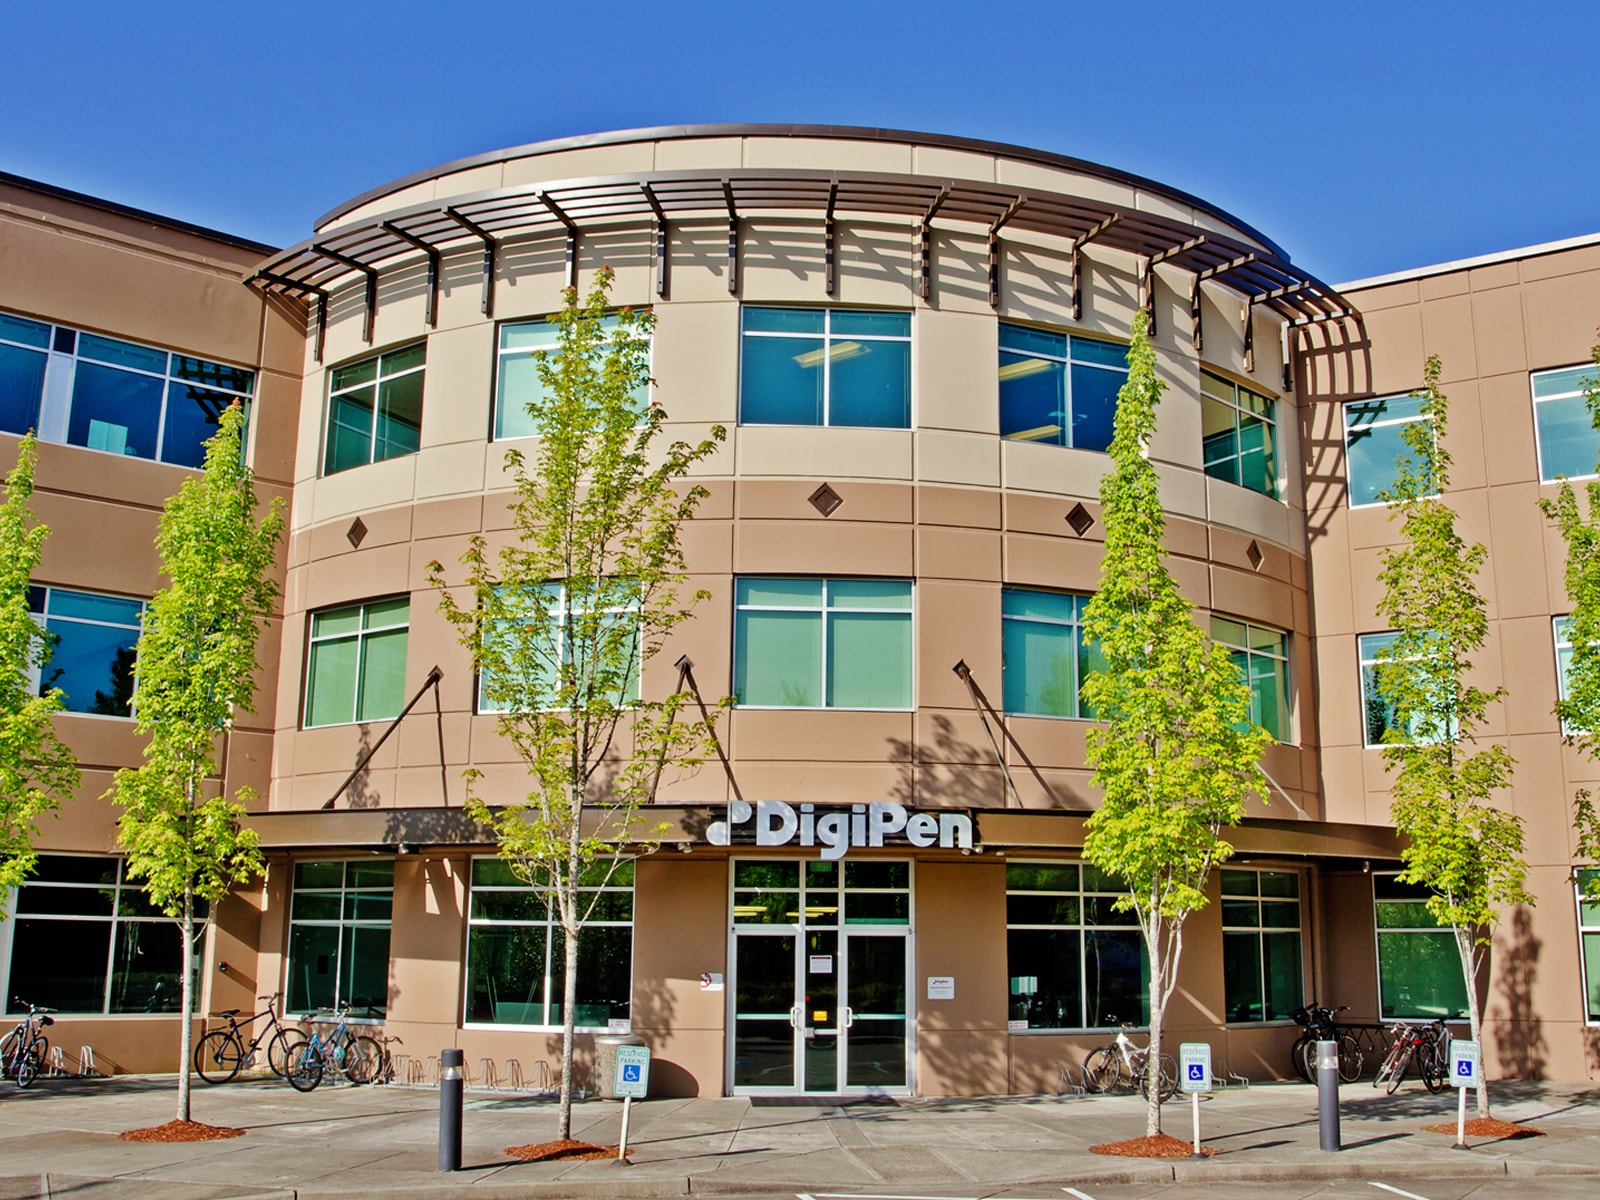 Picture of the DigiPen front entrance on a sunny day